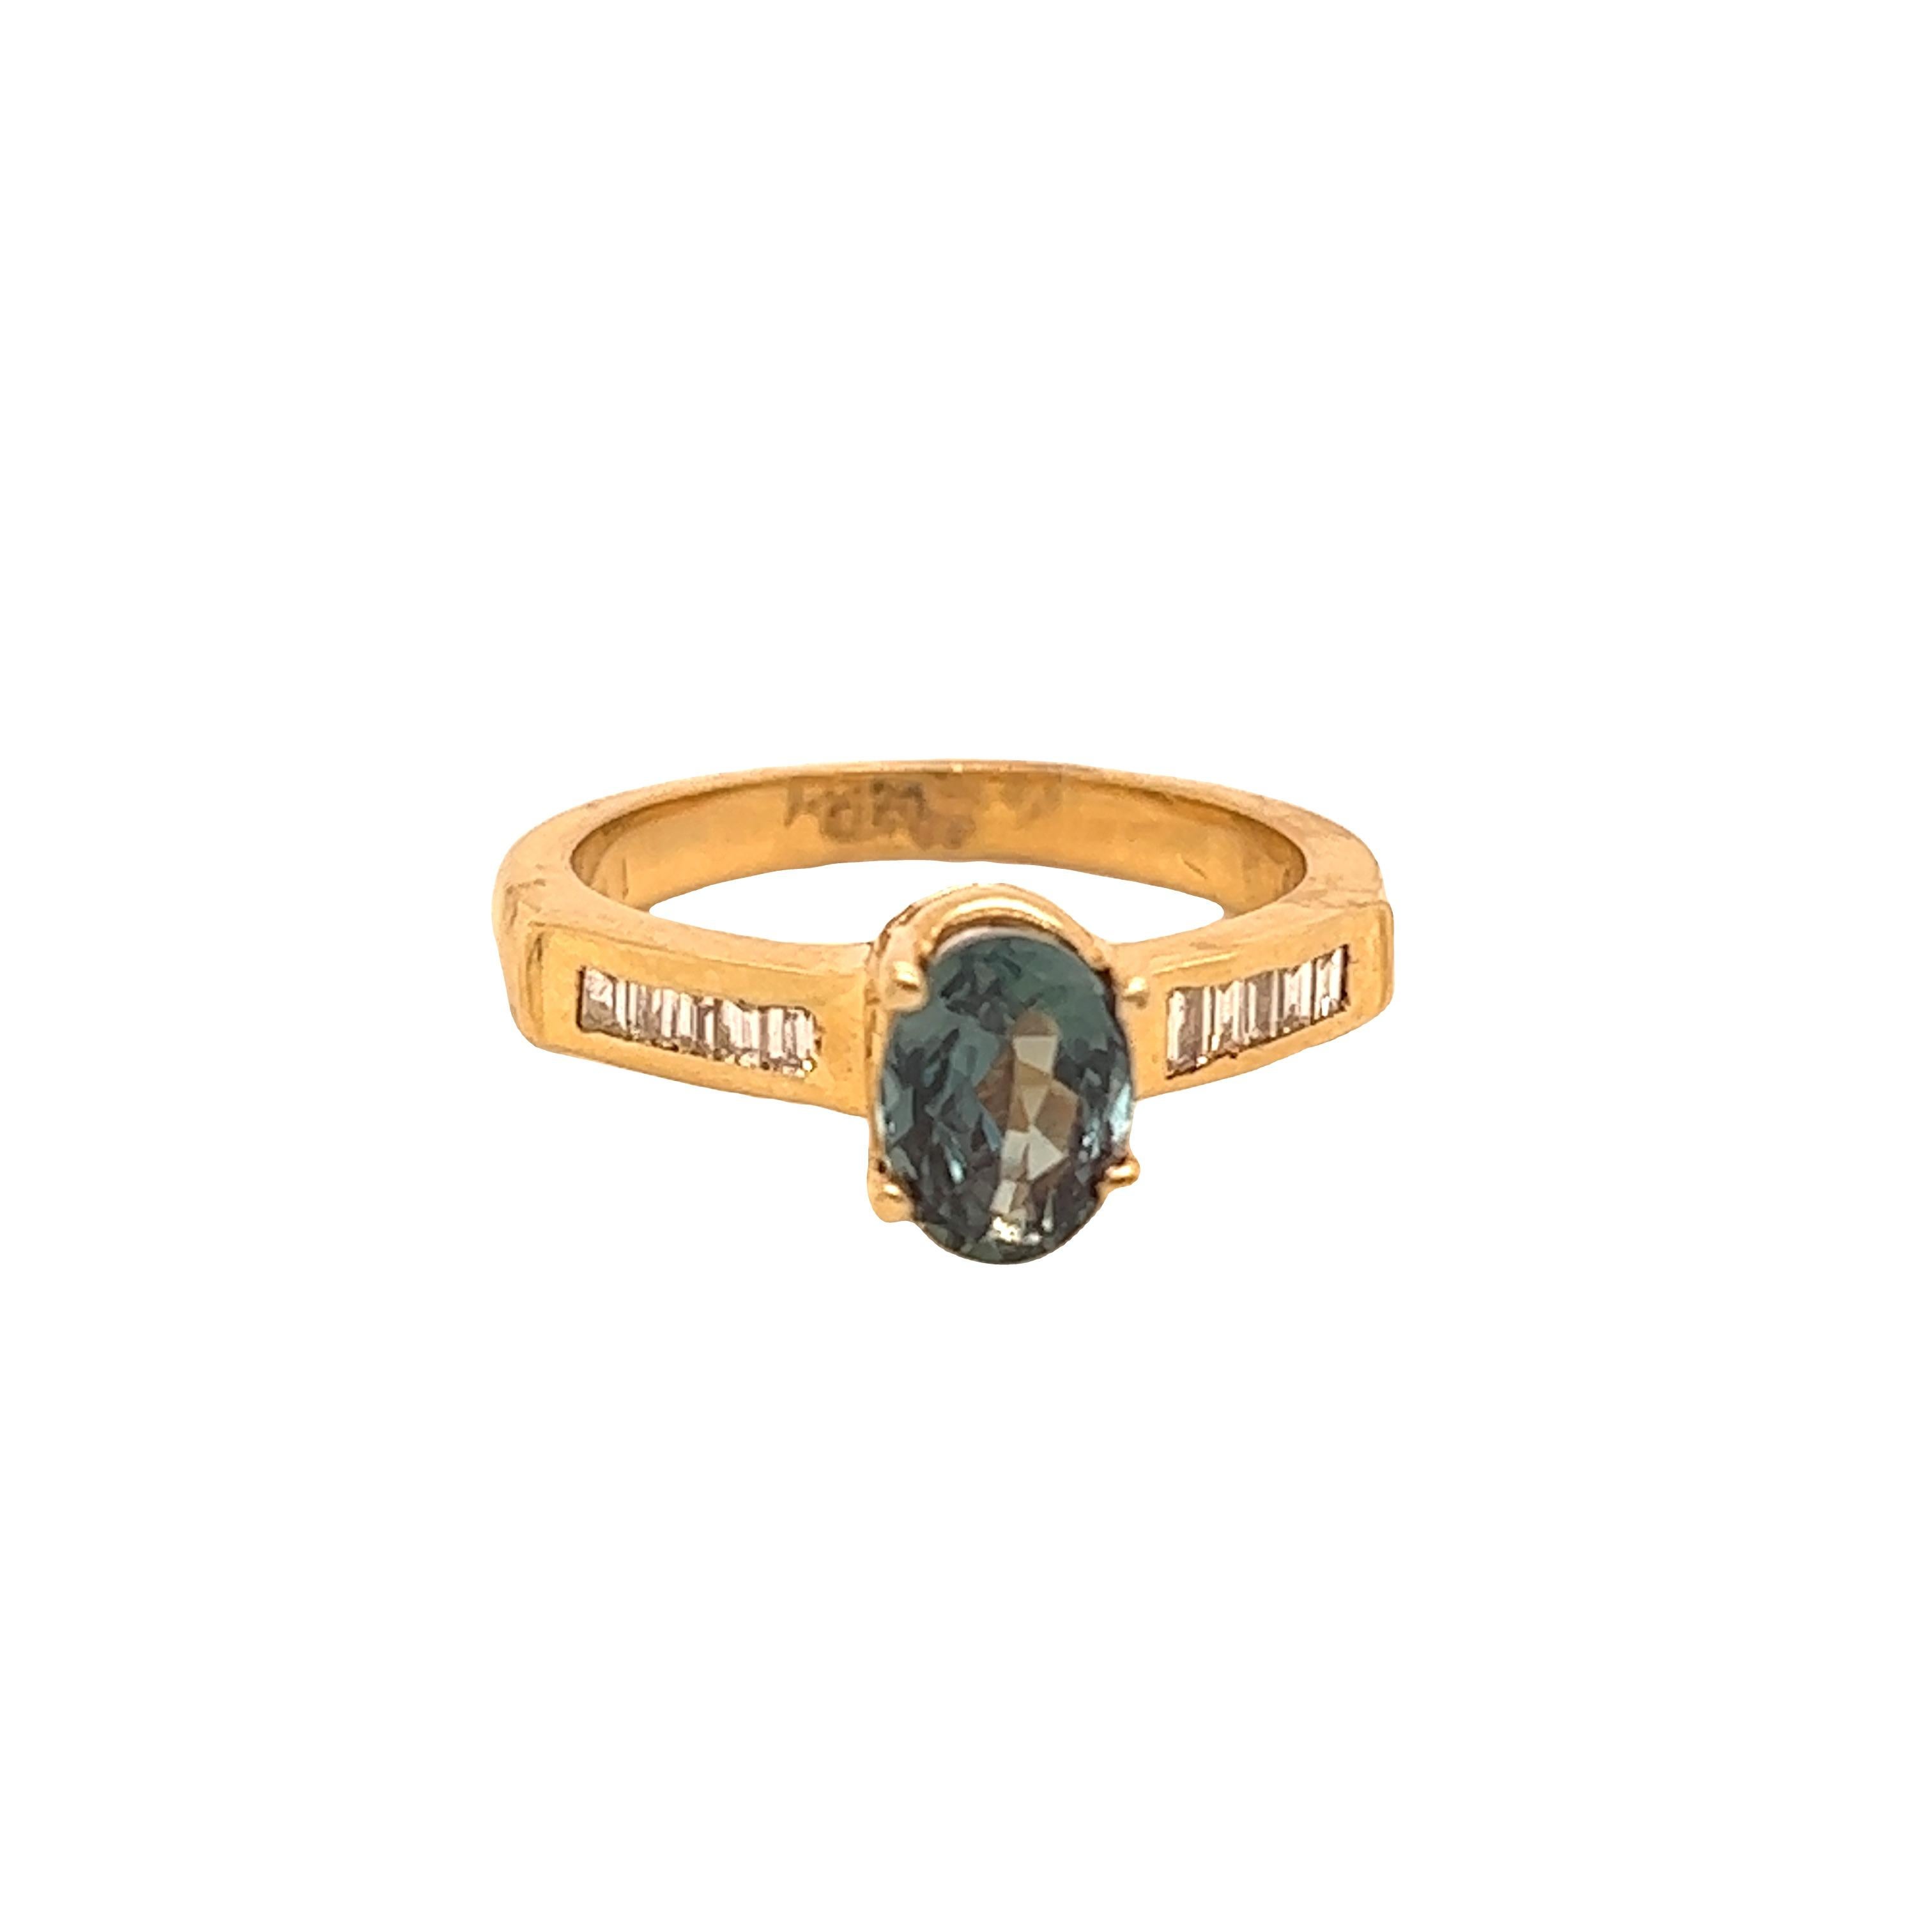 This is a gorgeous natural AAA quality Oval Alexandrite surrounded by dainty diamonds that is set in a 14K Yellow Gold setting. This ring features a natural 1.30 carat oval alexandrite that is certified by the Gemological Institute of America (GIA)